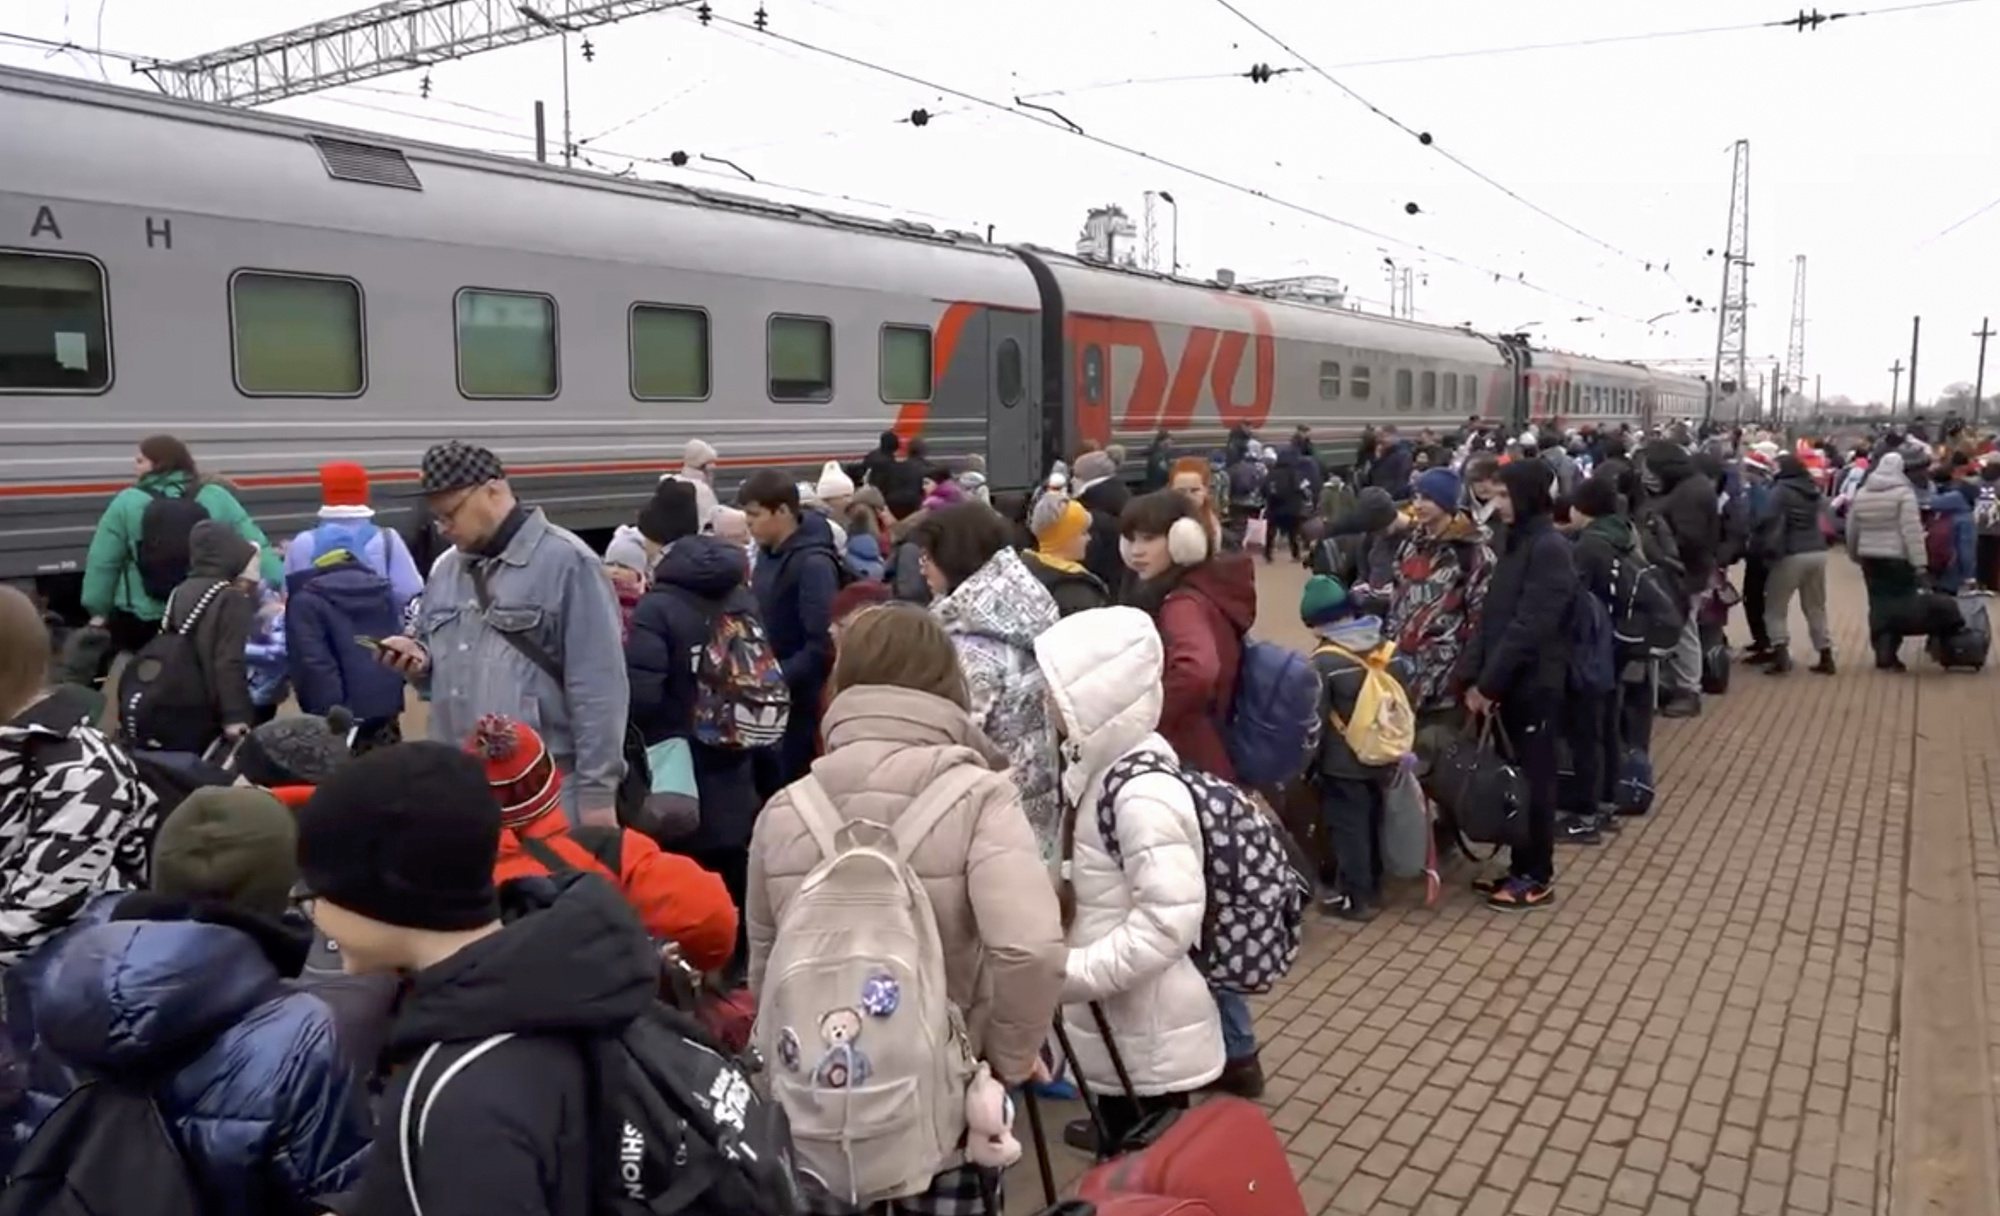 epa11236178 A still image taken from a handout video provided by the Governor of the Belgorod Region Vyacheslav Gladkov shows children gathering on a railway station platform in Belgorod, Russia, 22 March 2024. The authorities of the Belgorod region decided to take about 9,000 children to other regions of Russia due to shelling carried out by Armed Forces of Ukraine (AFU), Gladkov said. Boys and girls from the Grayvoronsky and Shebekinsky urban districts, the Belgorod district, as well as the city of Belgorod went on vacation to children&#039;s health camps. Gladkov said that over the past week, as a result of shelling by the Ukrainian Armed Forces in the Belgorod region, 16 civilians were killed and 98 injured.  EPA/VYACHESLAV GLADCOV HANDOUN HANDOUT   HANDOUT EDITORIAL USE ONLY/NO SALES HANDOUT EDITORIAL USE ONLY/NO SALES